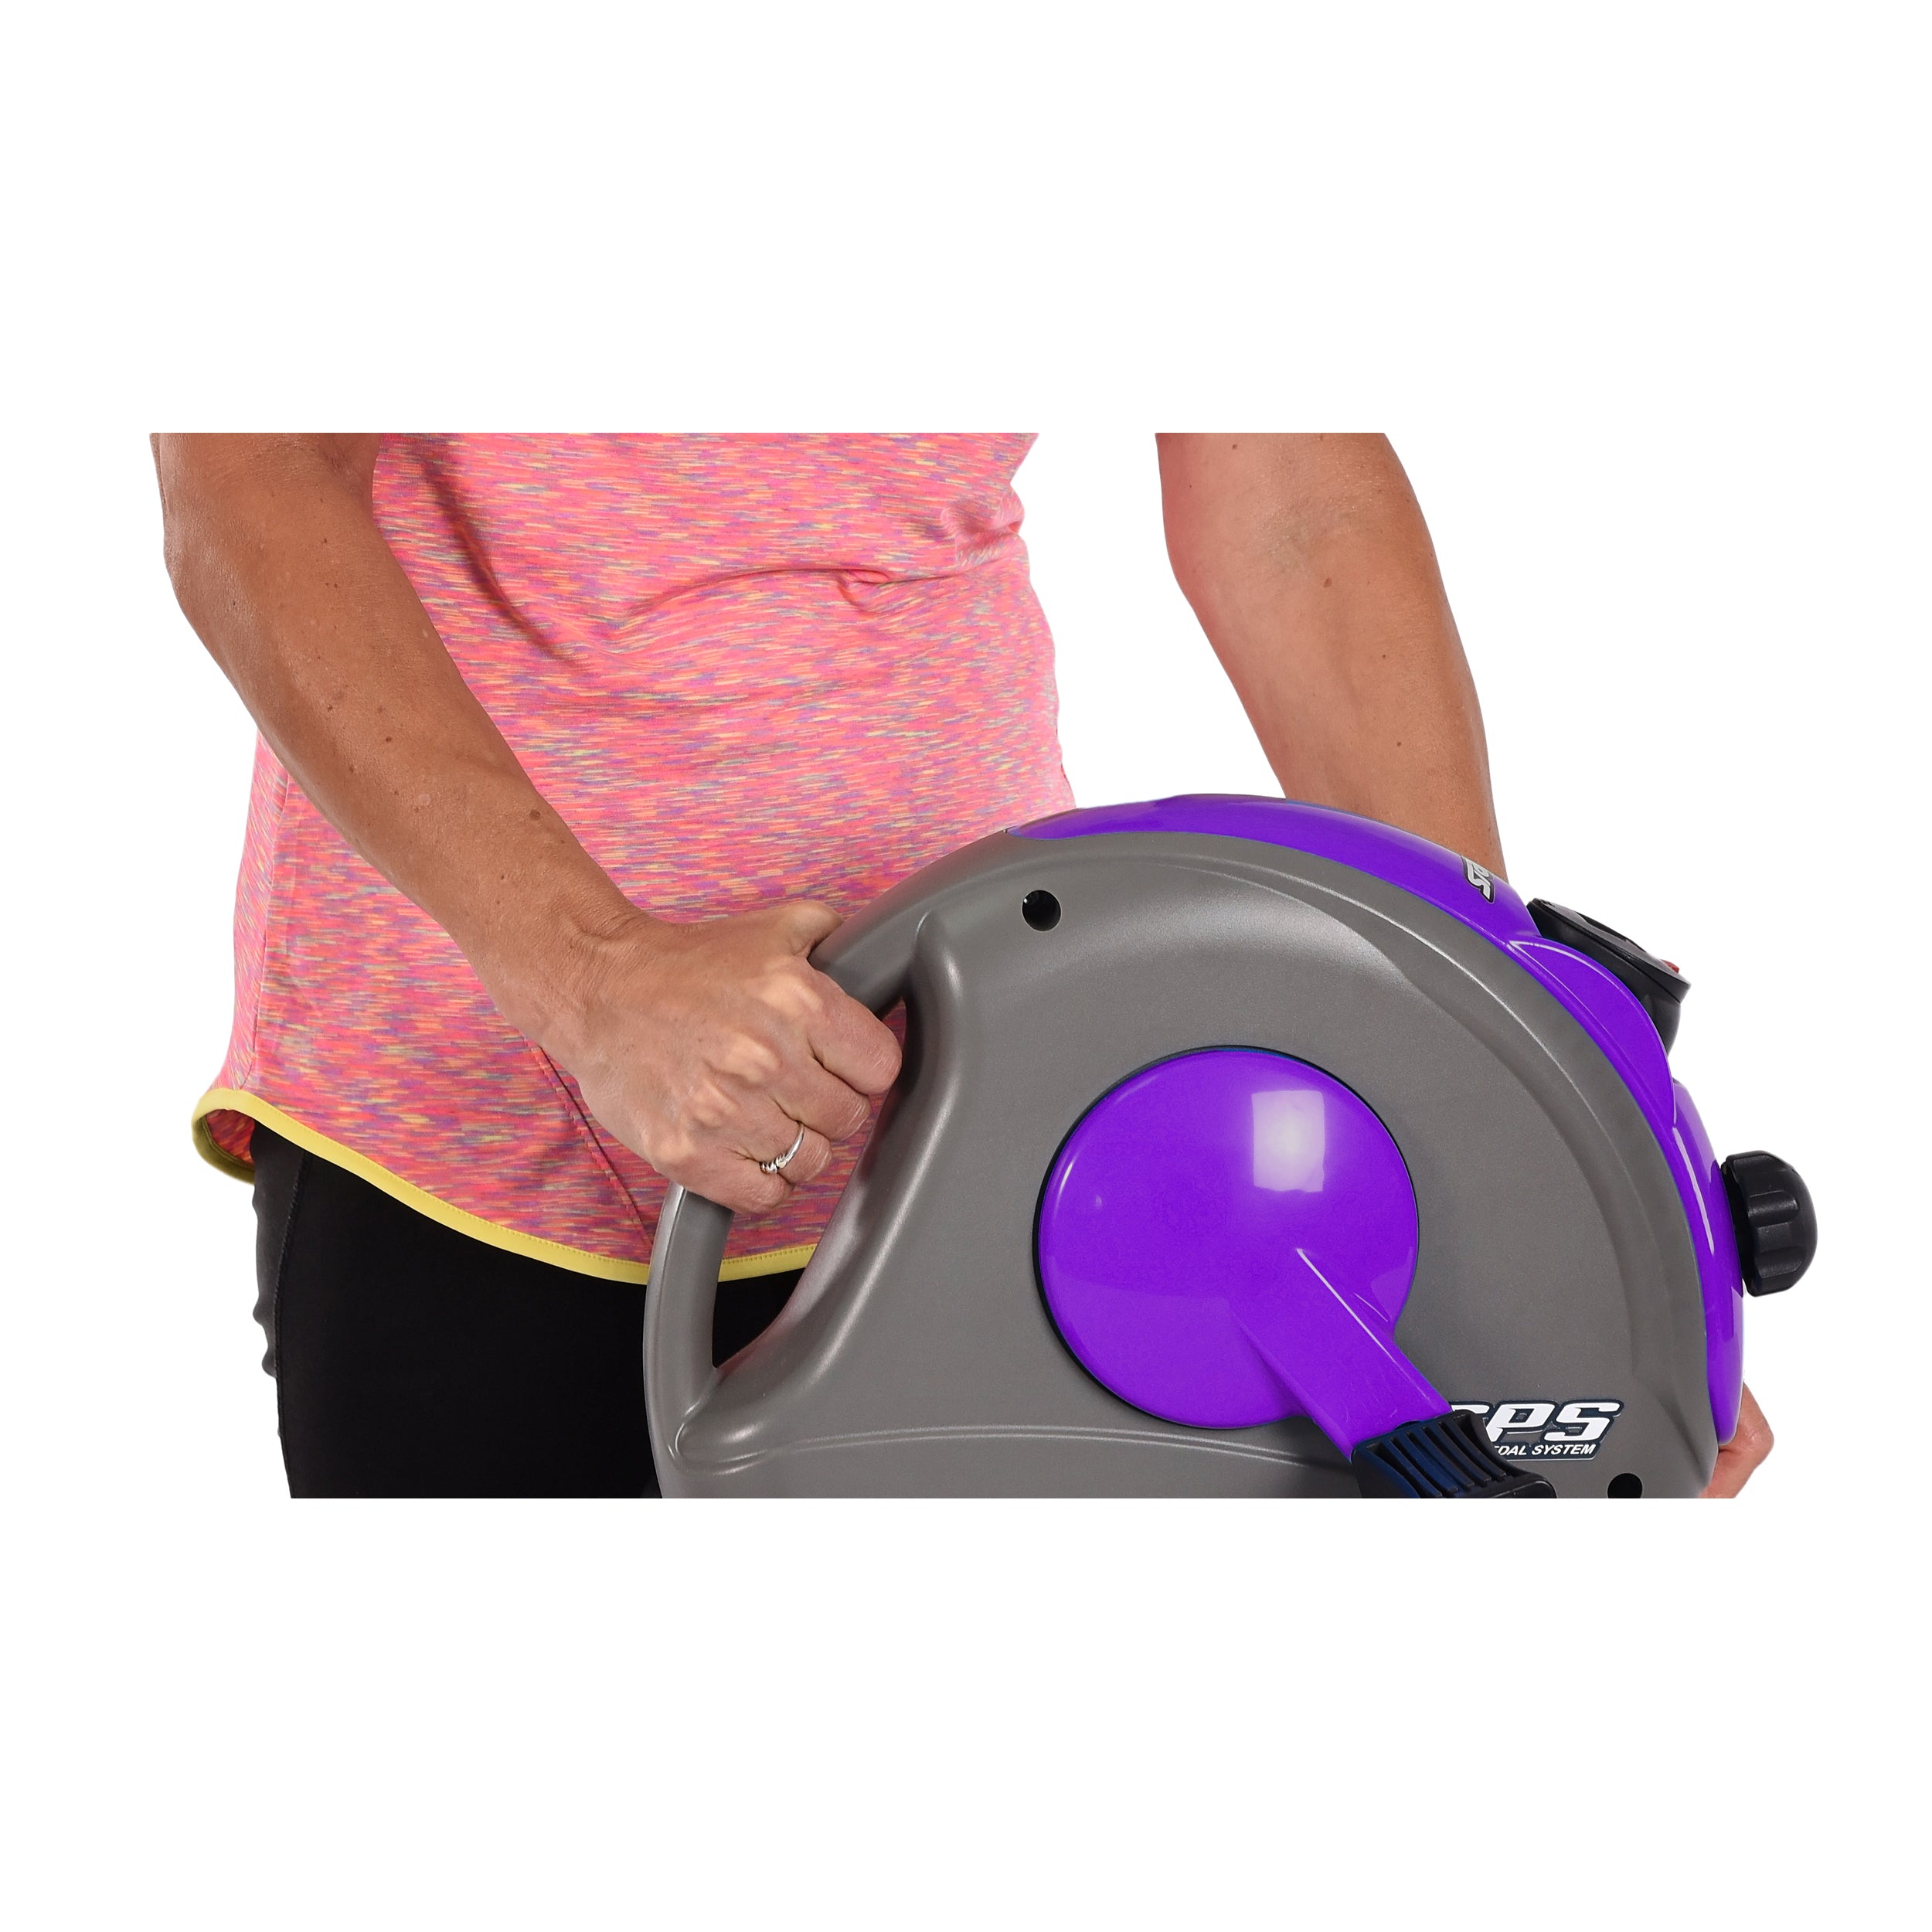 Stamina Mini Exercise Bike with Smooth Pedal System / Purple